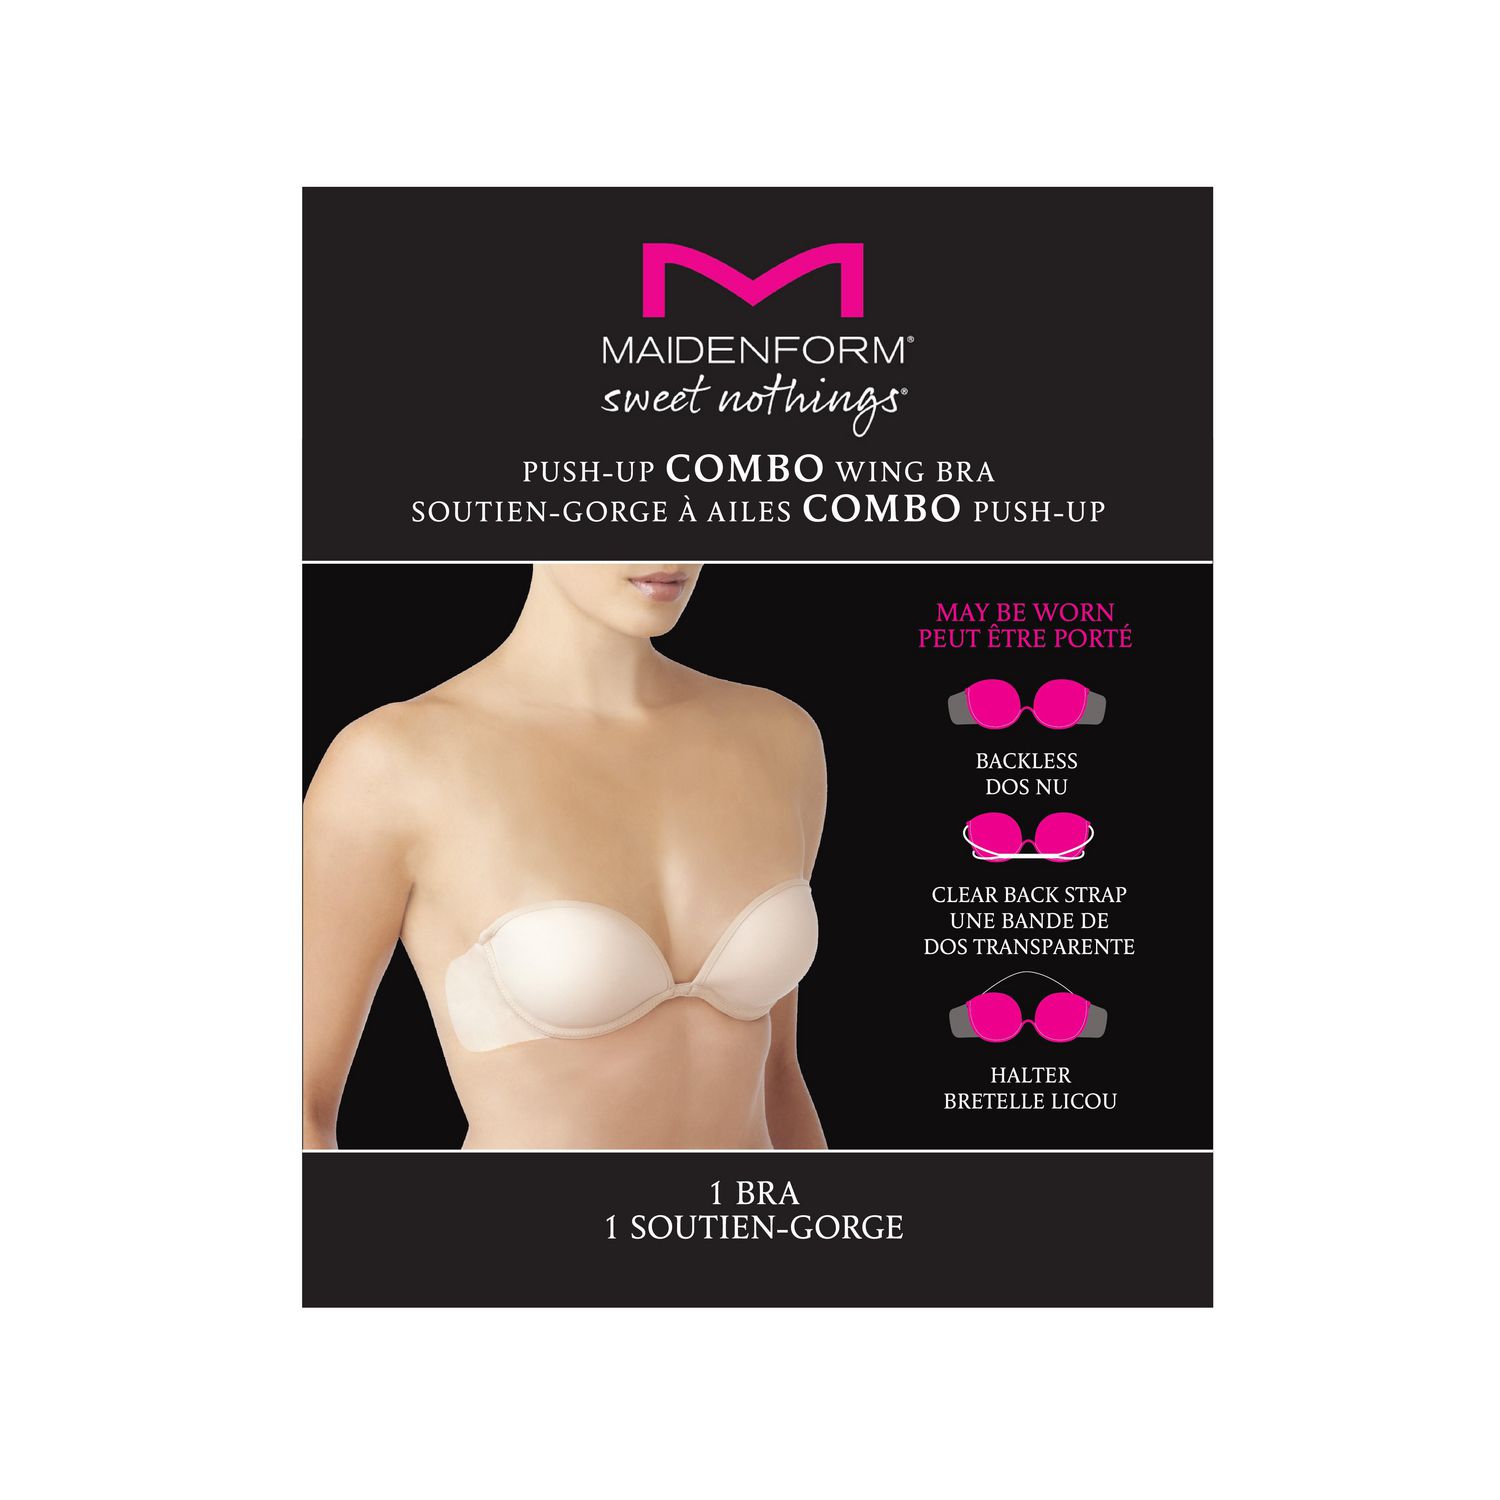 Maidenform Sweet Nothings Push-Up Combo Wing Bra 